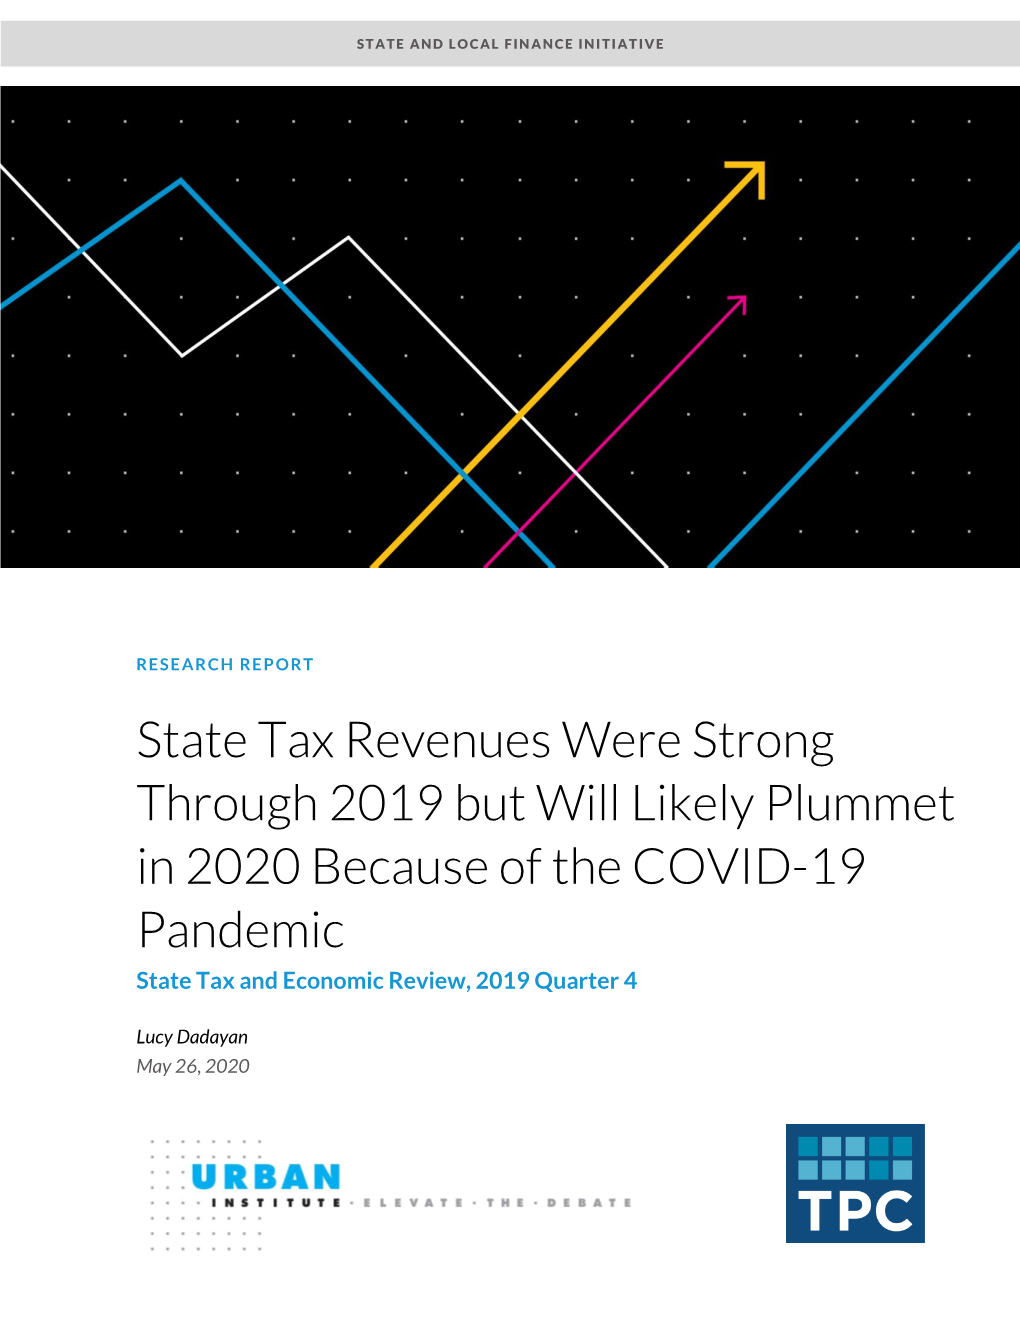 State Tax Revenues Were Strong Through 2019 but Will Likely Plummet in 2020 Because of the COVID-19 Pandemic State Tax and Economic Review, 2019 Quarter 4